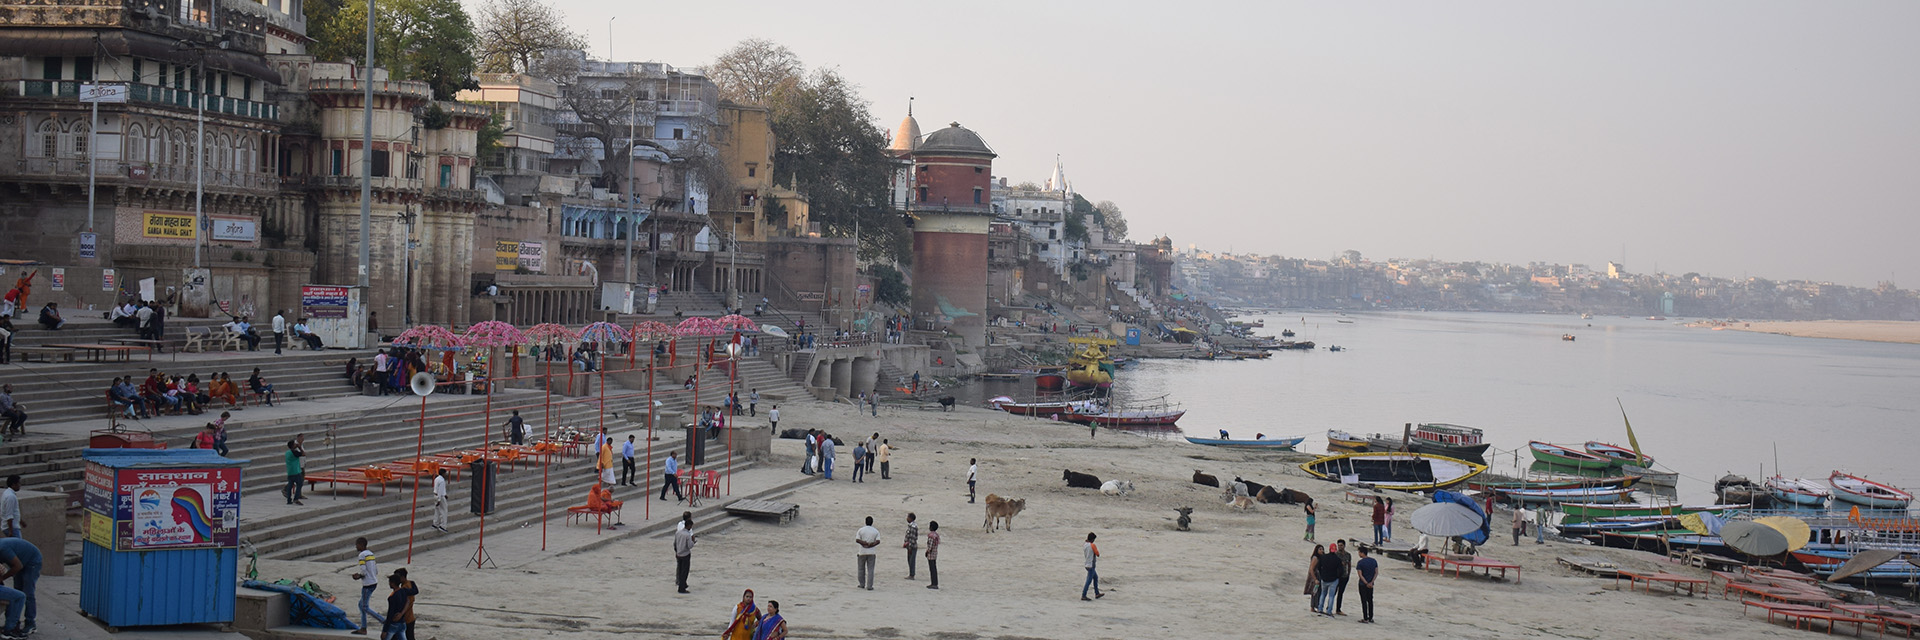 People enjoy the Assi Ghat along the Ganges River. This Ghat is one of the areas for which the students created a proposal.